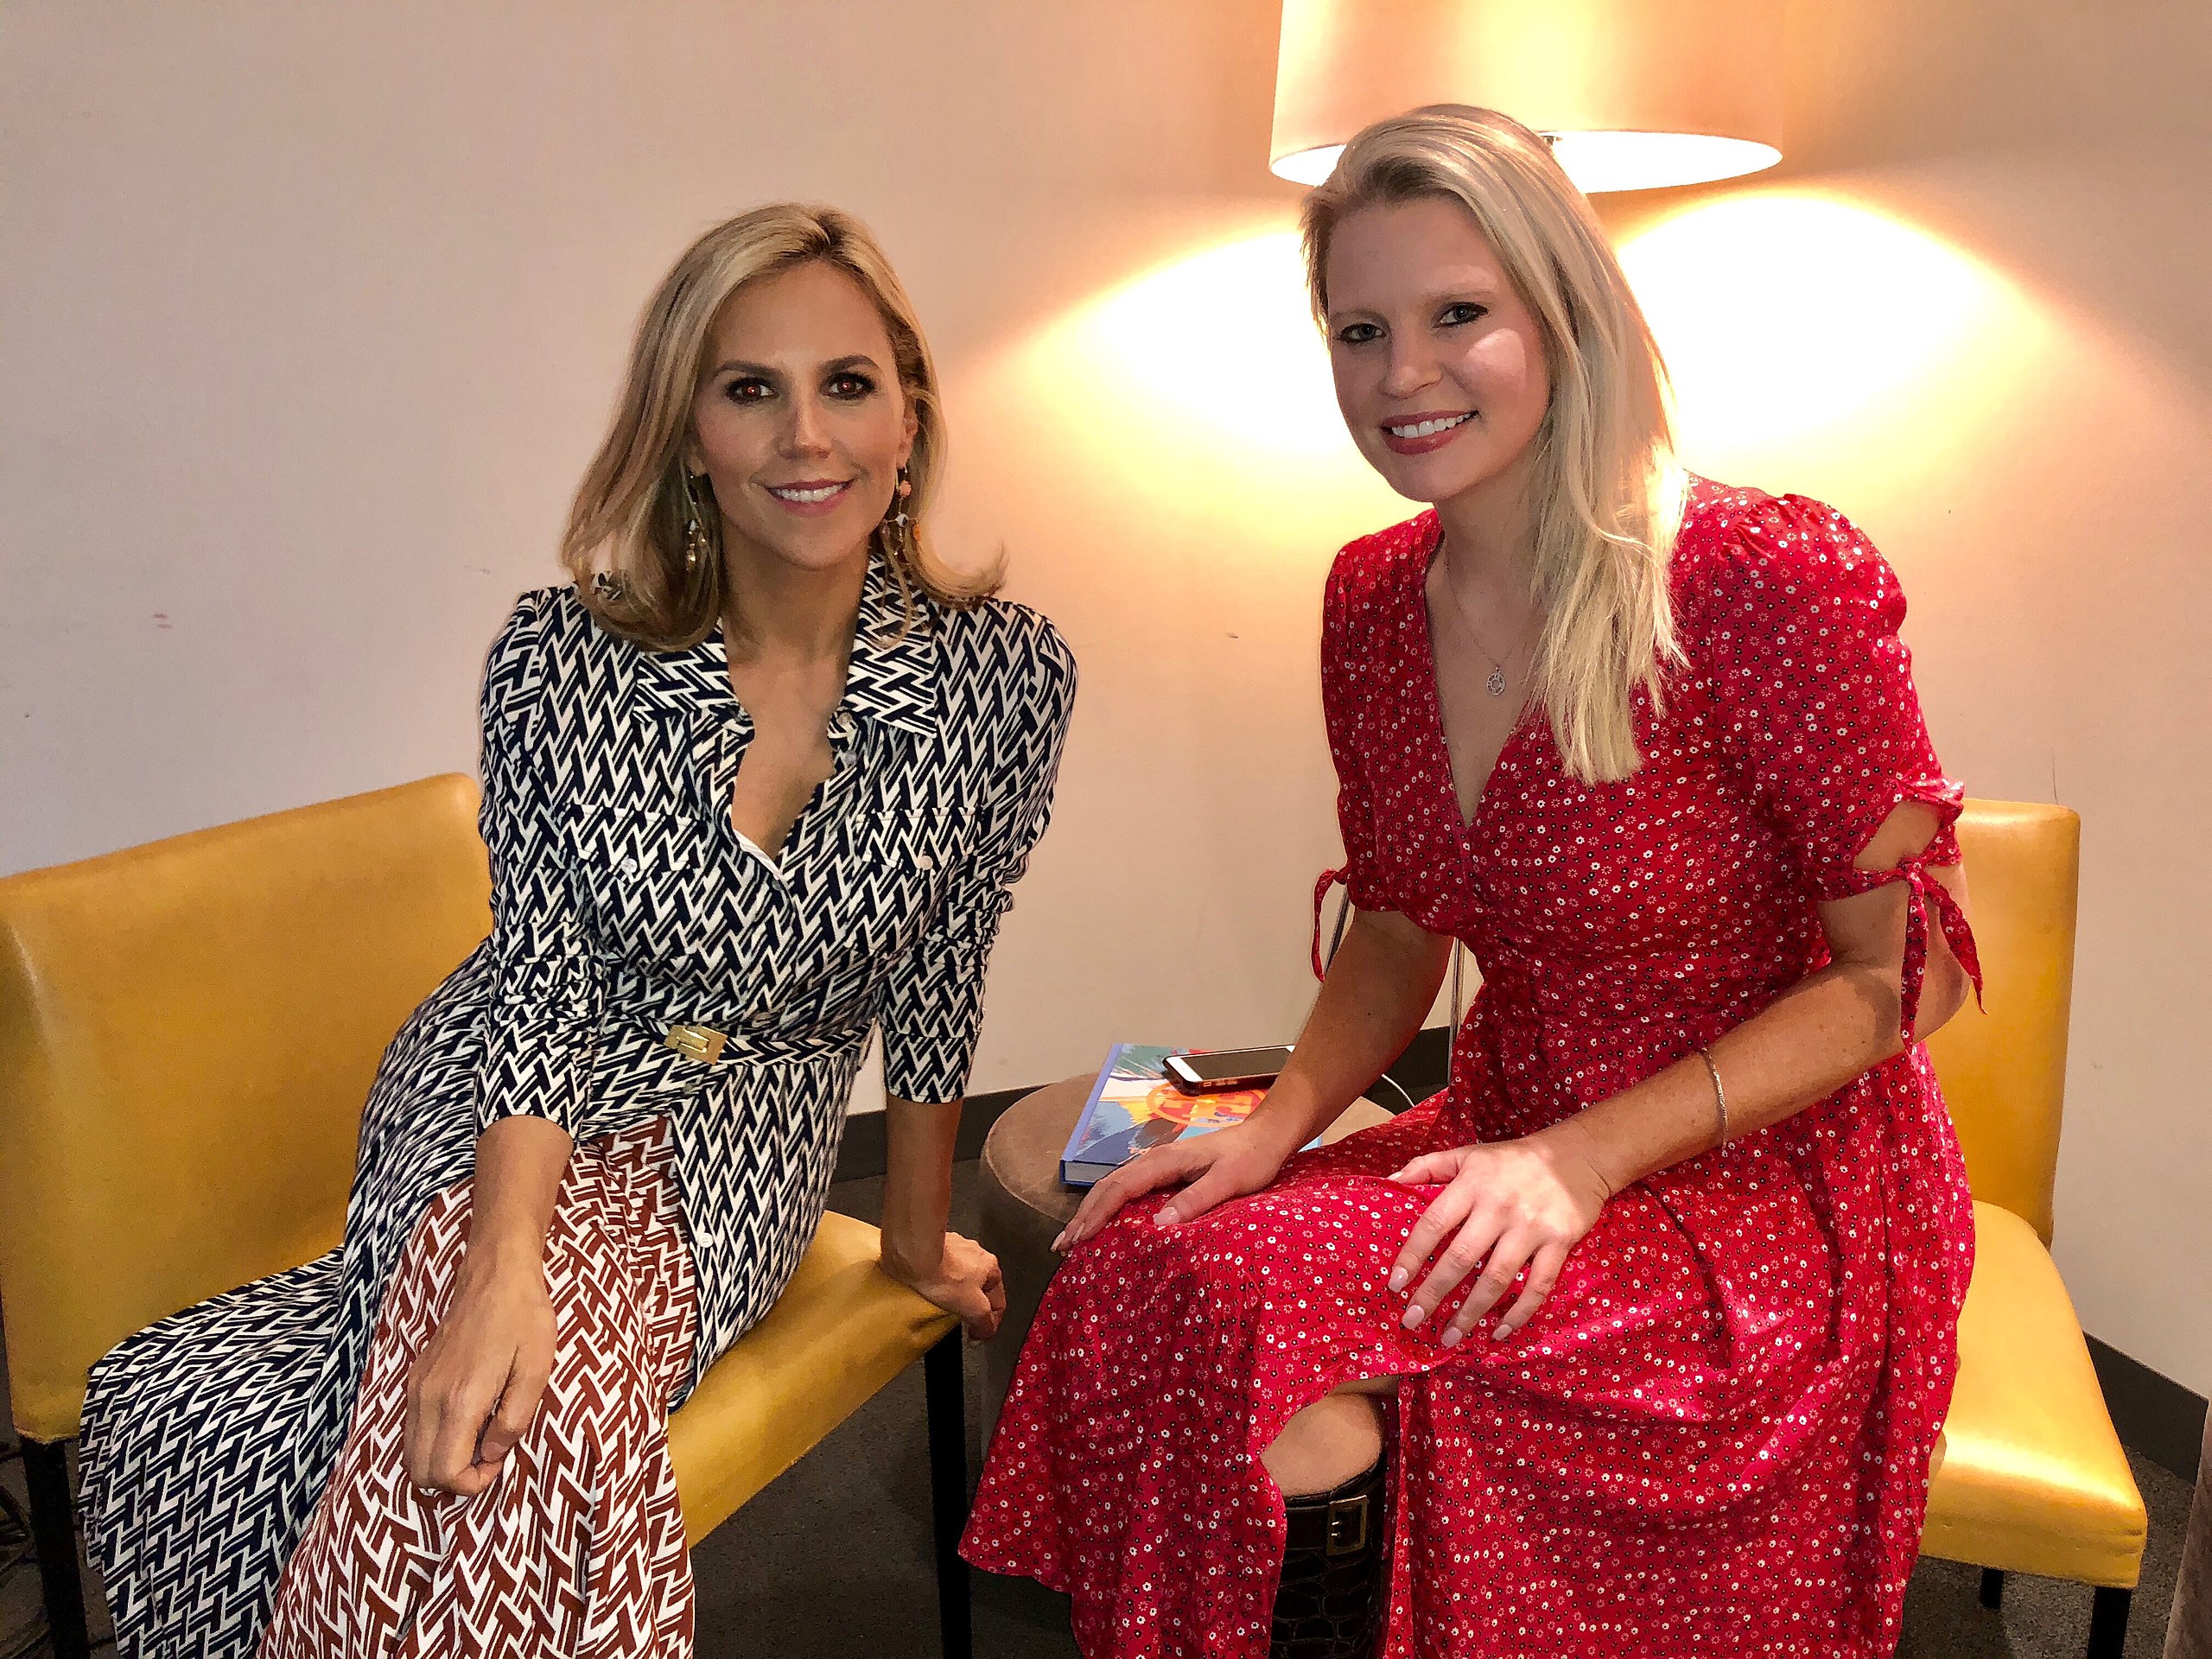 File:Field interviews Tory Burch in New York  - Wikimedia Commons